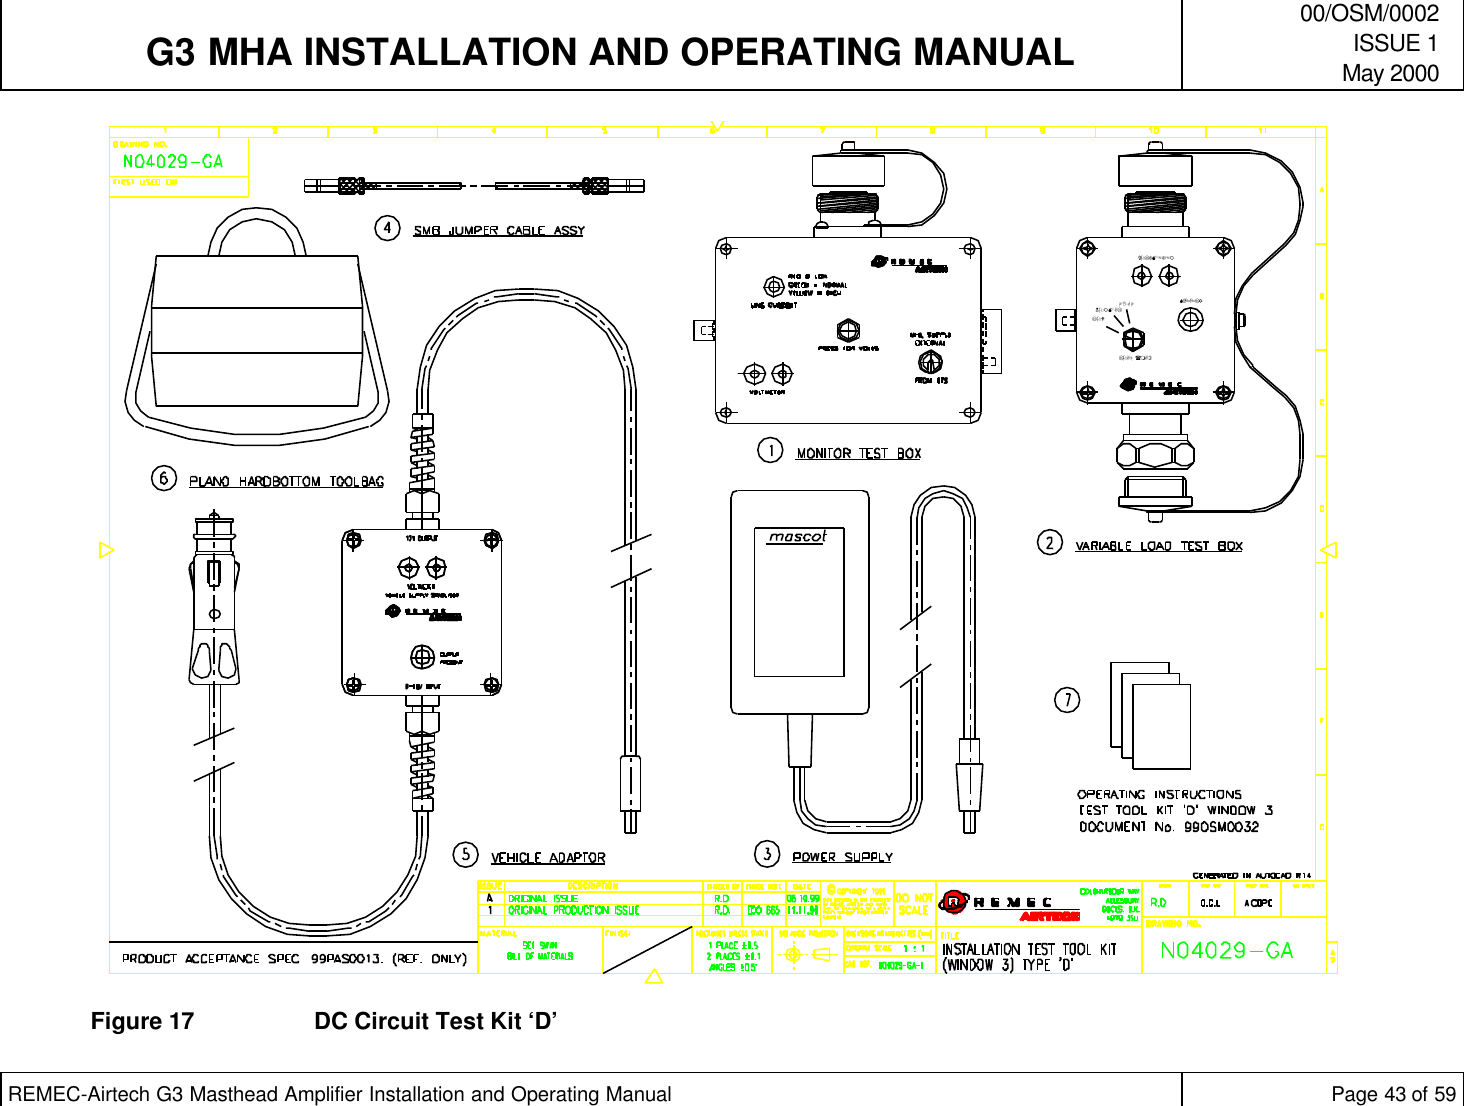   G3 MHA INSTALLATION AND OPERATING MANUAL00/OSM/0002ISSUE 1May 2000REMEC-Airtech G3 Masthead Amplifier Installation and Operating Manual Page 43 of 59Figure 17 DC Circuit Test Kit ‘D’LOAD (mA)NORMALLOWHIGH SUPPLYVOLTMETER